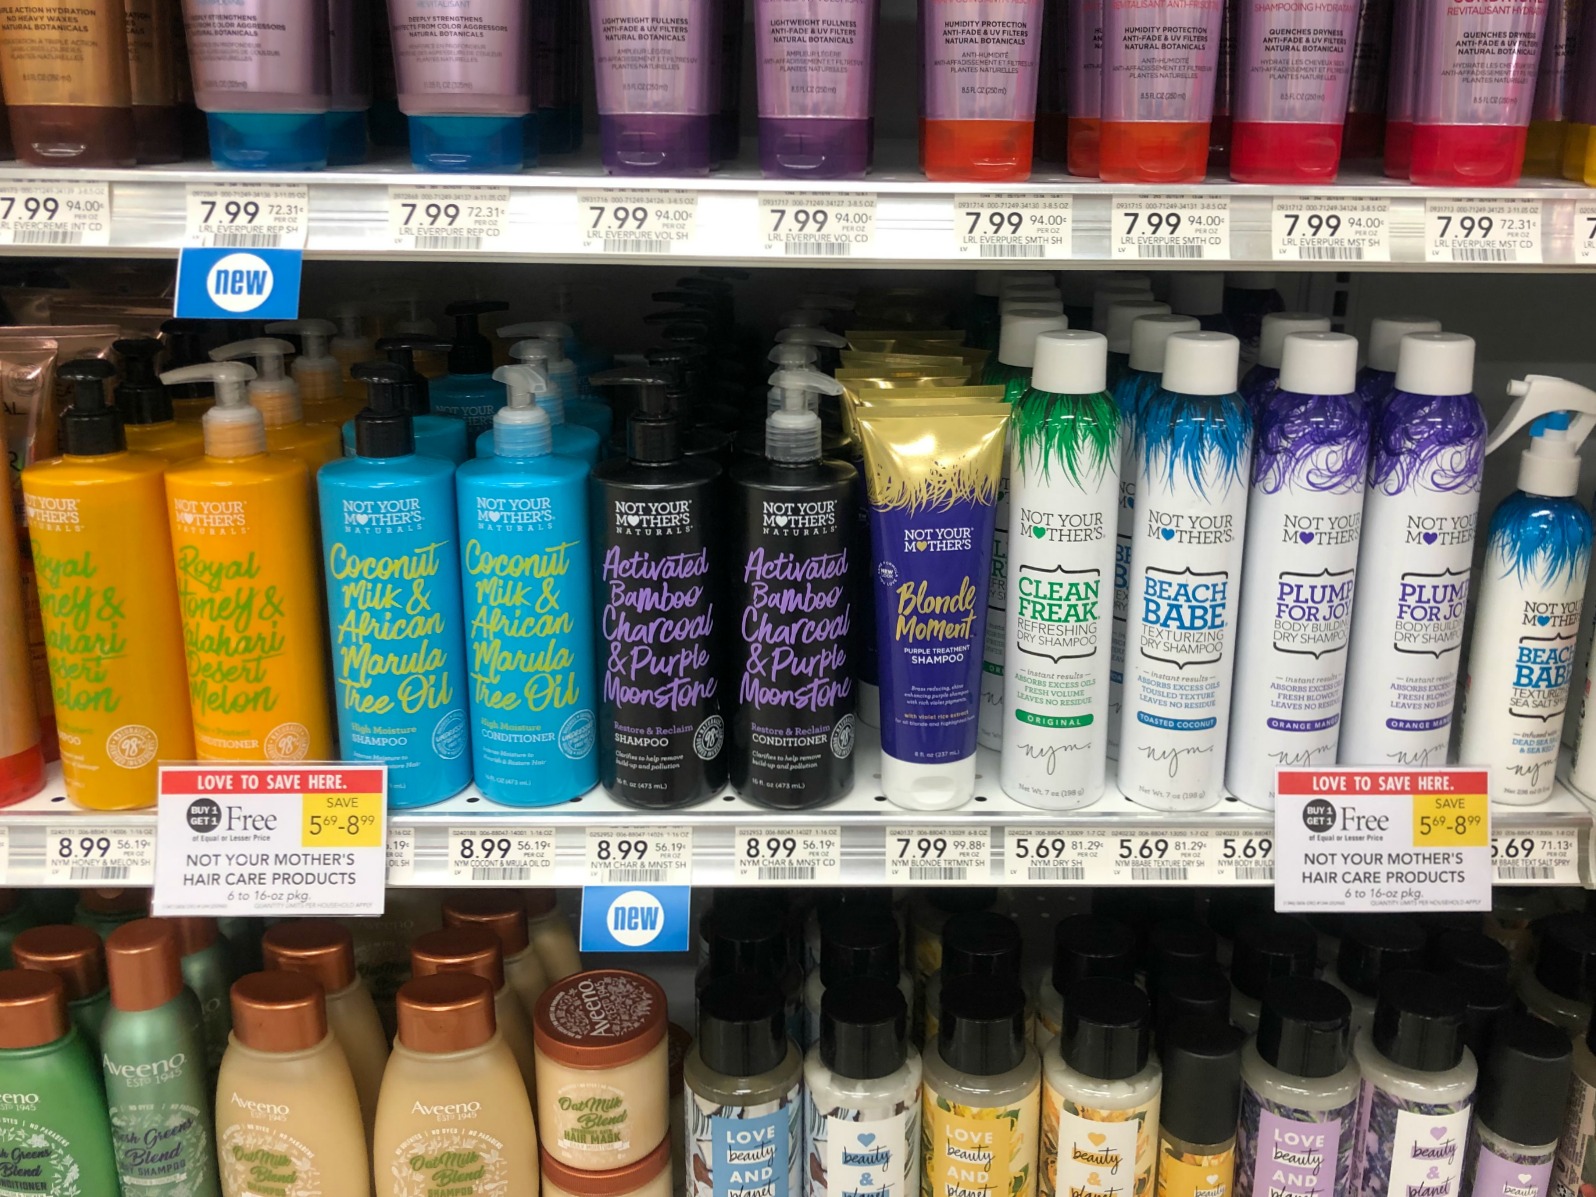 Stock Up On Your Favorite Not Your Mother’s Hair Care Products During The BOGO Sale At Publix on I Heart Publix 1